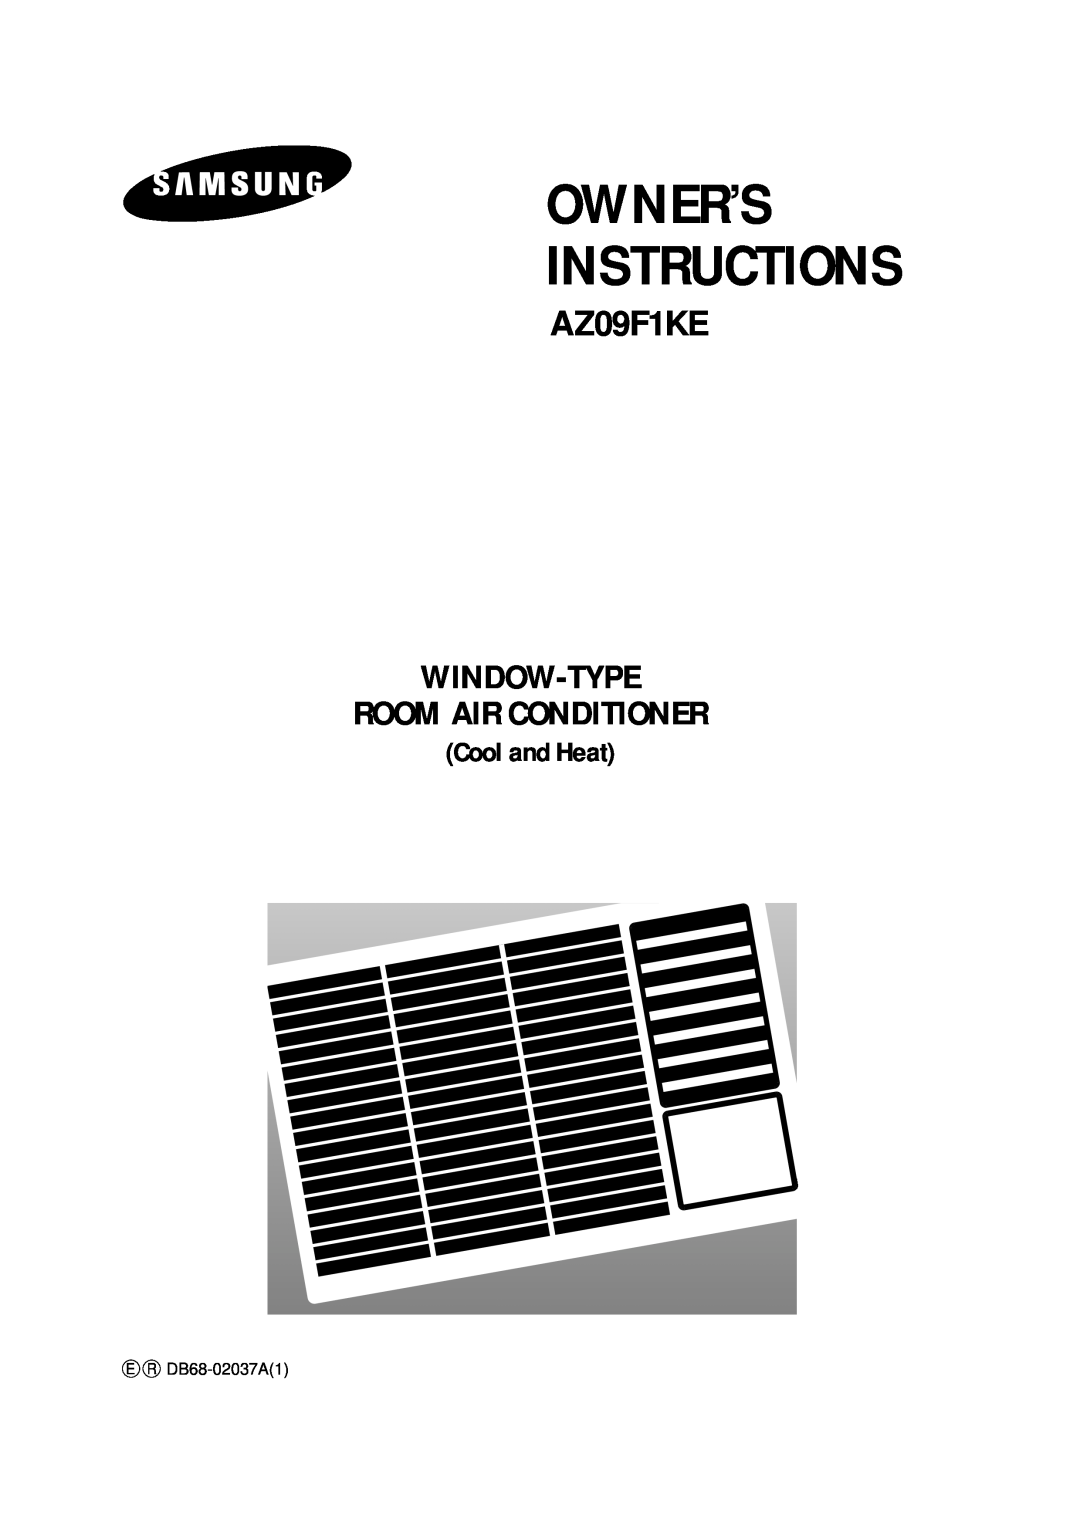 Samsung AZ09F1KE manual Owner’S Instructions, Window-Type Room Air Conditioner, Cool and Heat 